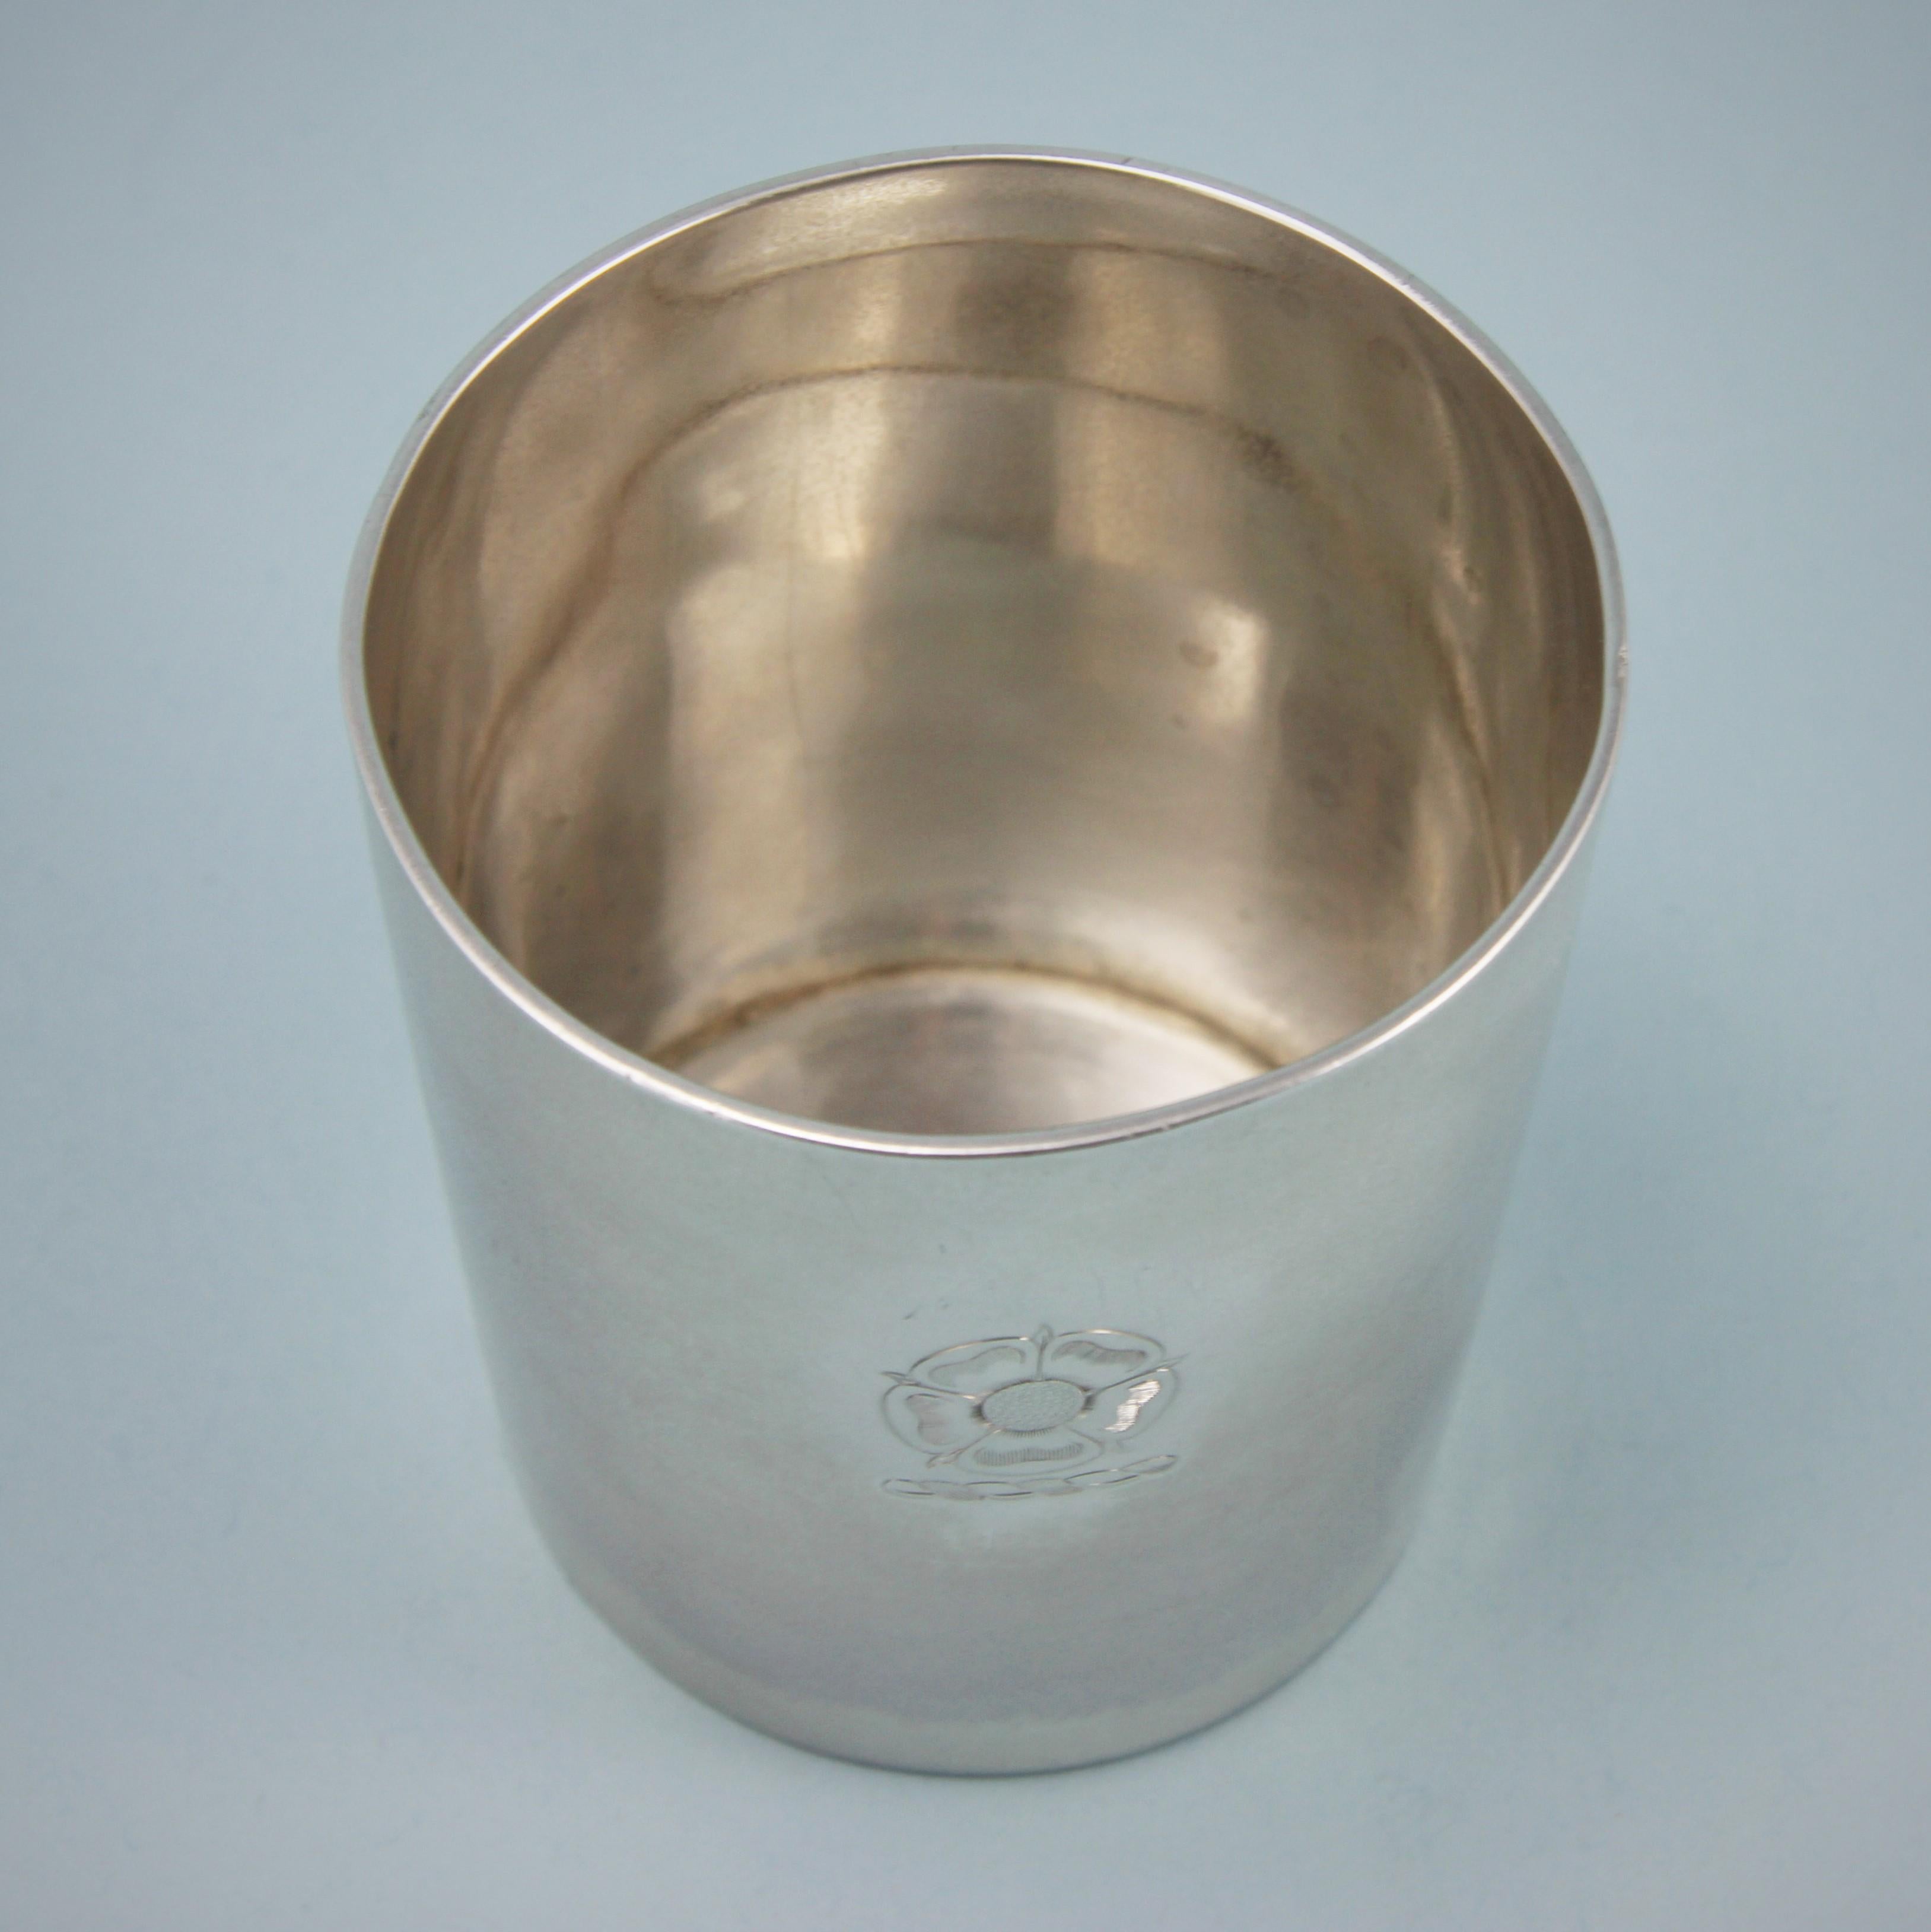 Elegant George III sterling silver pint beaker of good weight. 
Maker: Richard Sibley. London 1815. 

The beaker is plain apart from a crest of a stylised Tudor Rose which is possibly for Dorville or Dupre. Both of these names have been found as